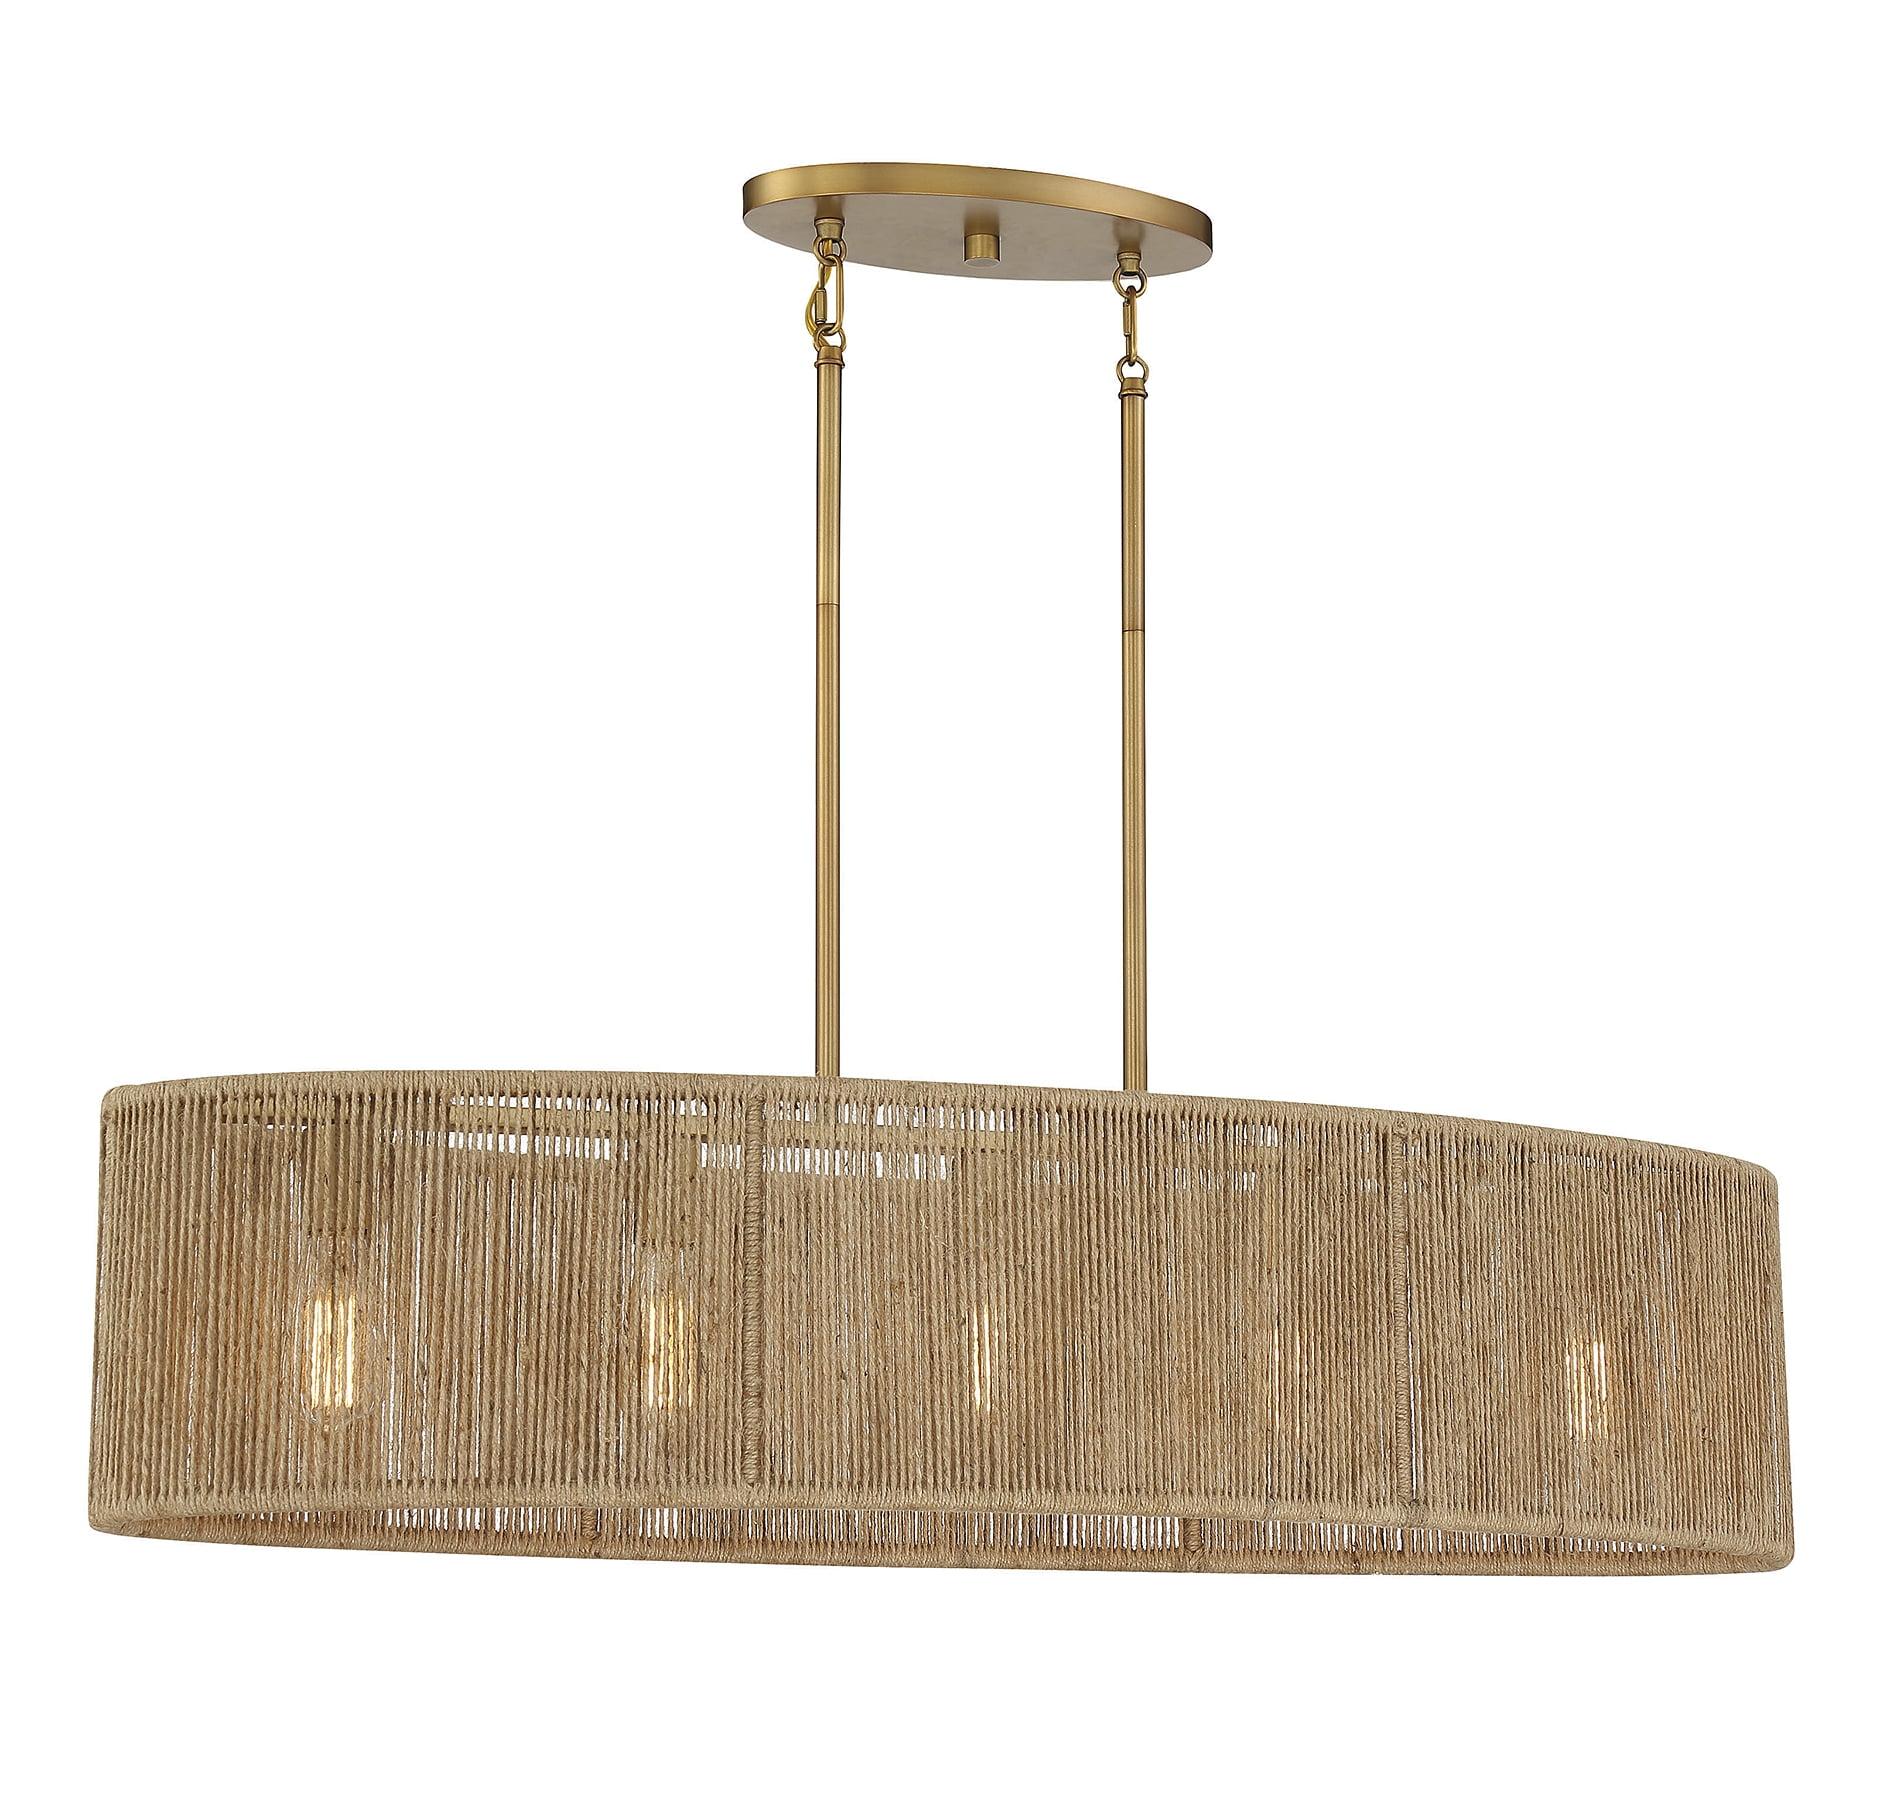 Warm Brass and Rope Textured 5-Light Linear Chandelier